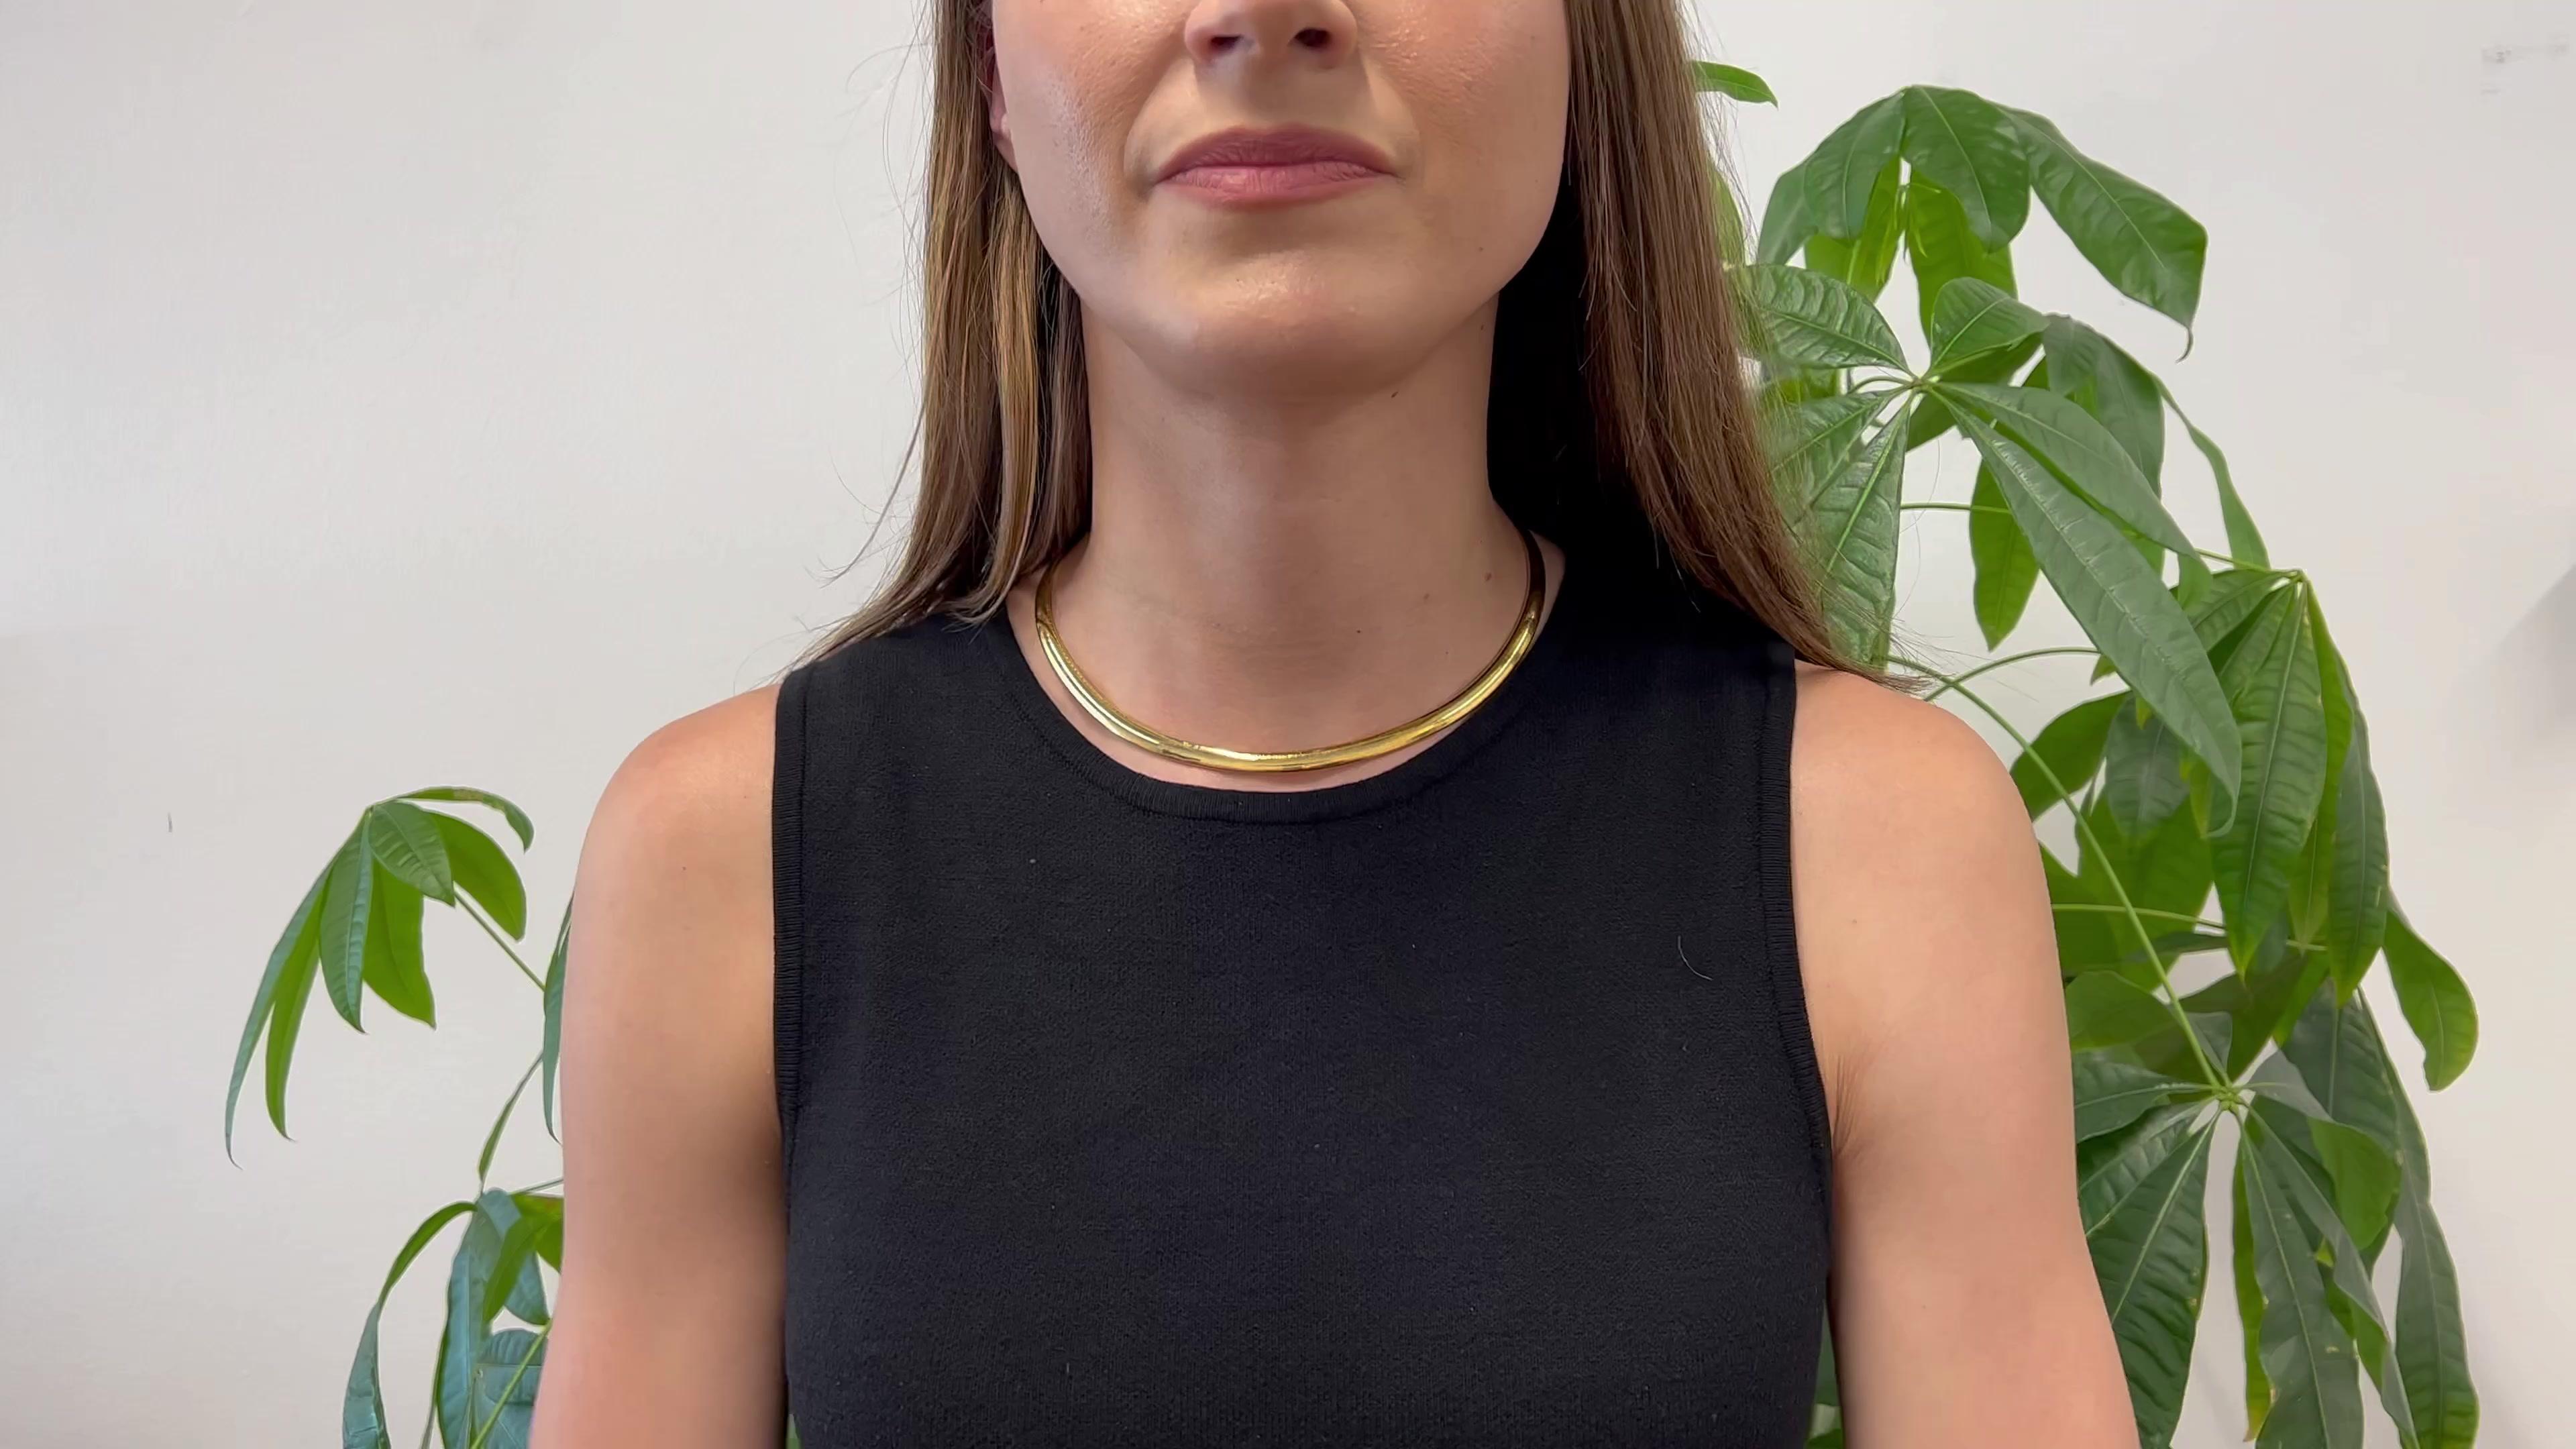 One Vintage Italian 18k Yellow Gold Flat Omega Chain Choker Necklace. Crafted in 18 karat yellow gold with Italian hallmarks, weighing 43.93 grams. Circa 1980. The necklace is 16 ½ inches in length.

About this Item: There's never a wrong time for